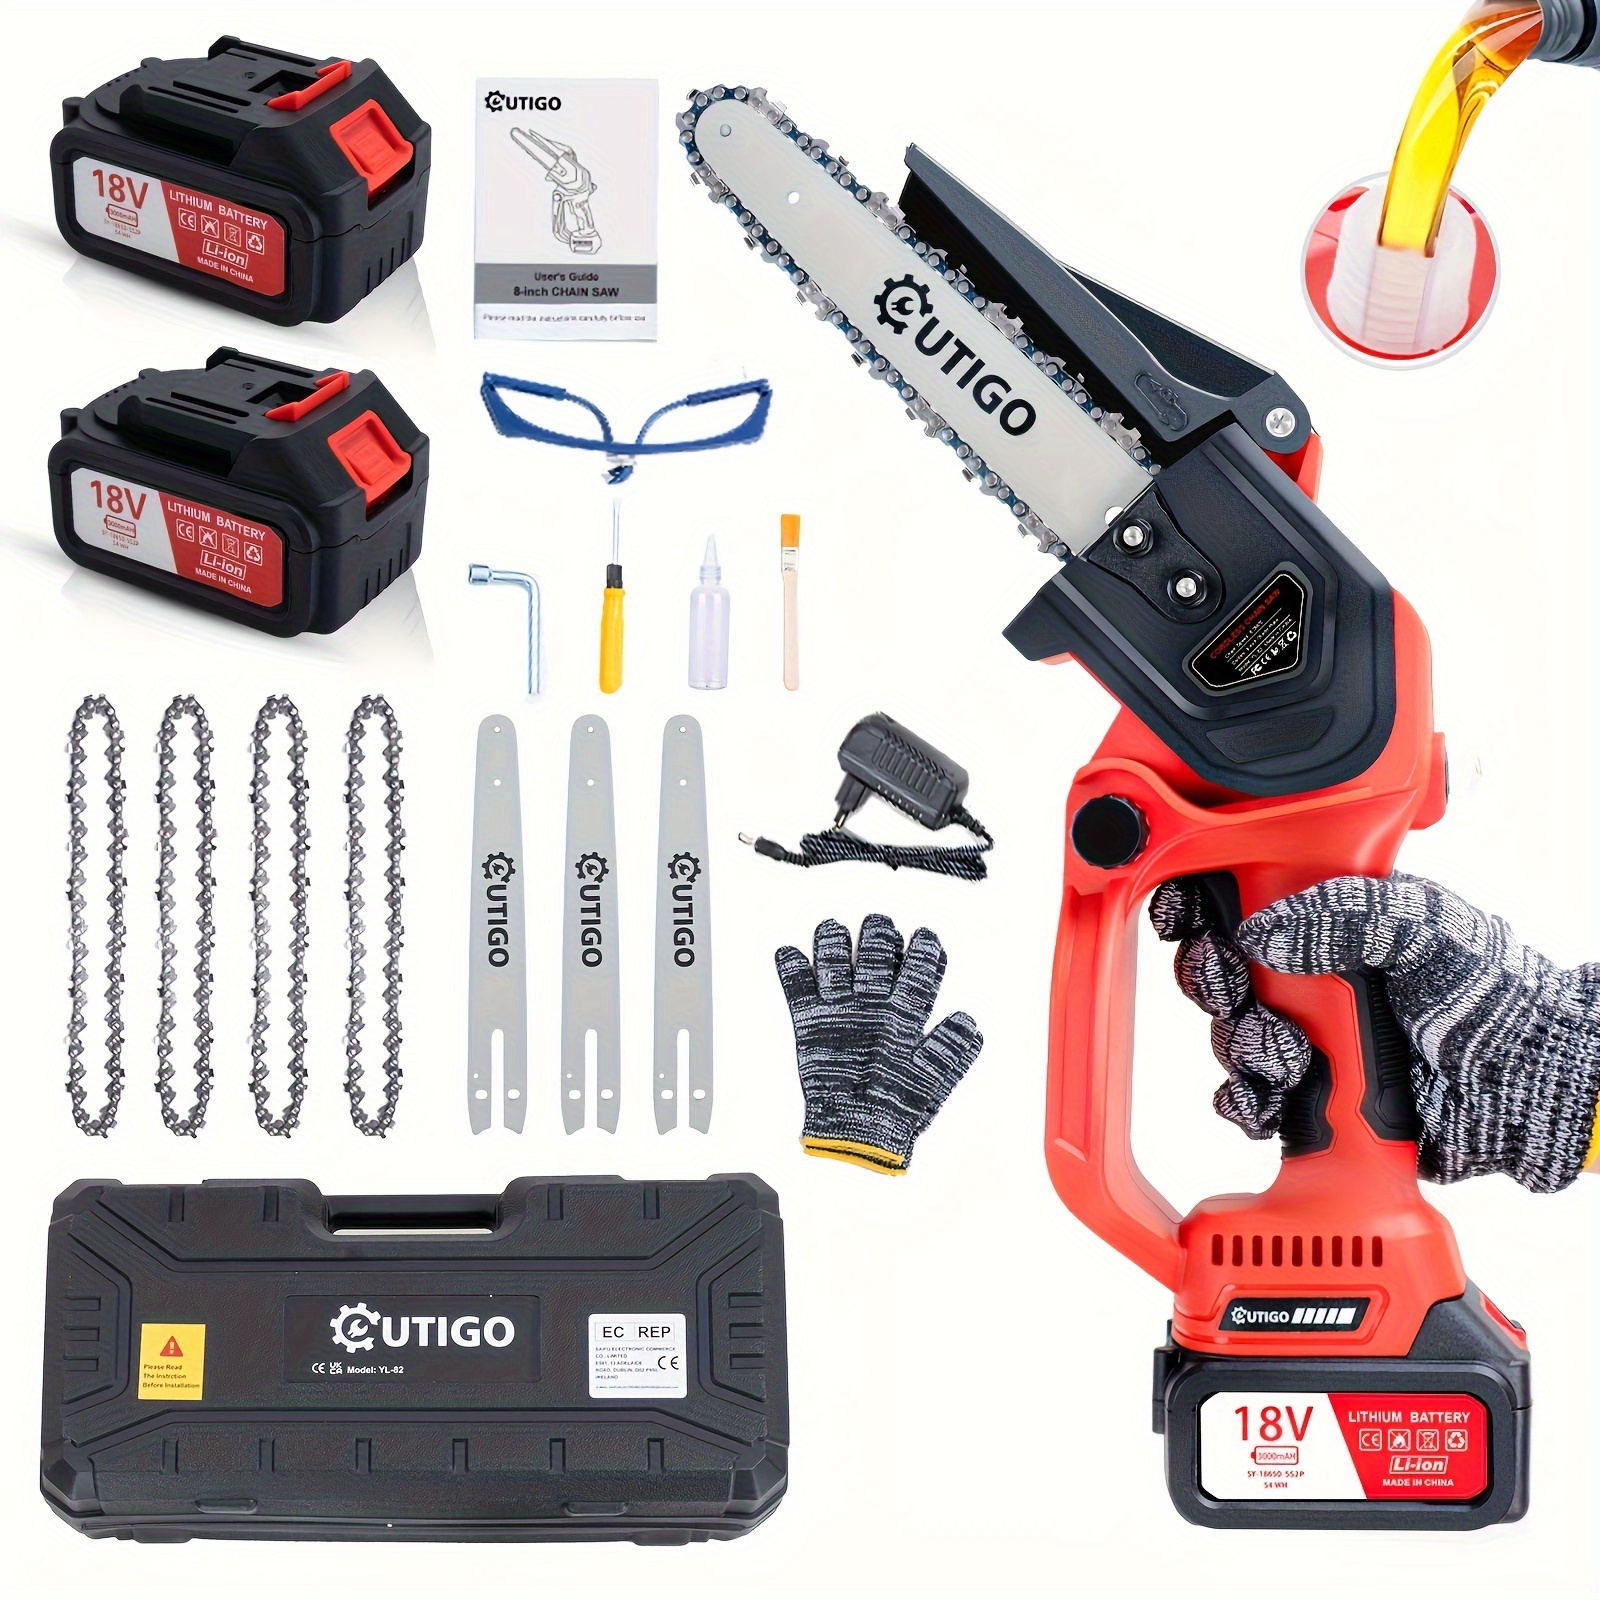 

1 Set Of Outigo Brushless Motor Chain Saw, 8c Small Household Handheld Saw, Cordless Logging Saw, Lithium Battery Chain Saw With Battery, Outdoor Tree Sawing Tool